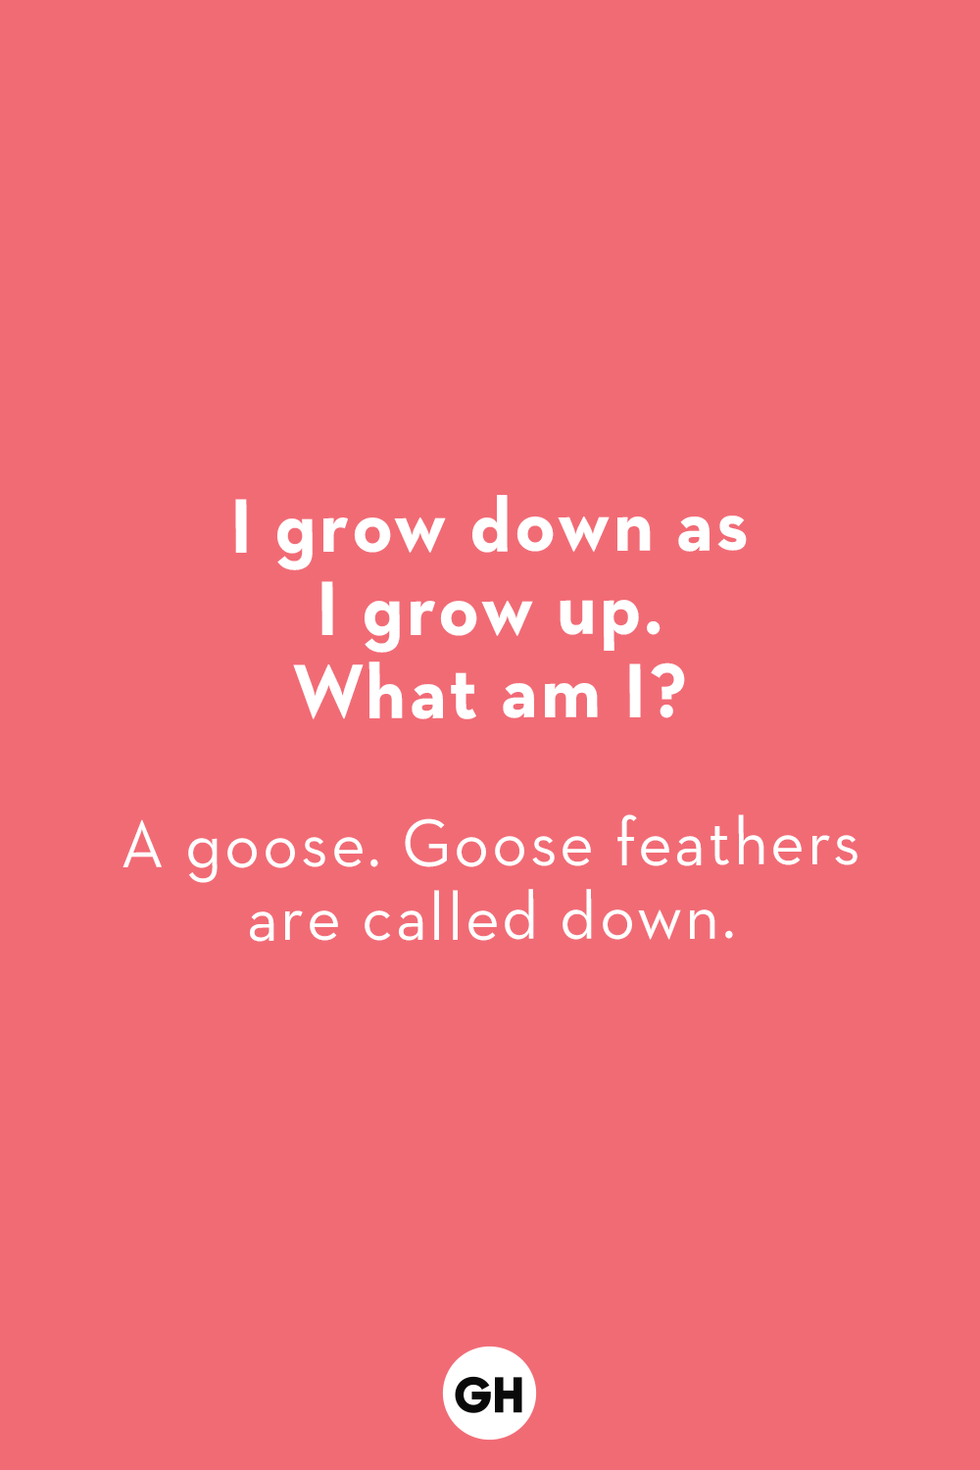 a riddle for kids that says q i grow down as i grow up what am i a a goose goose feathers are called down